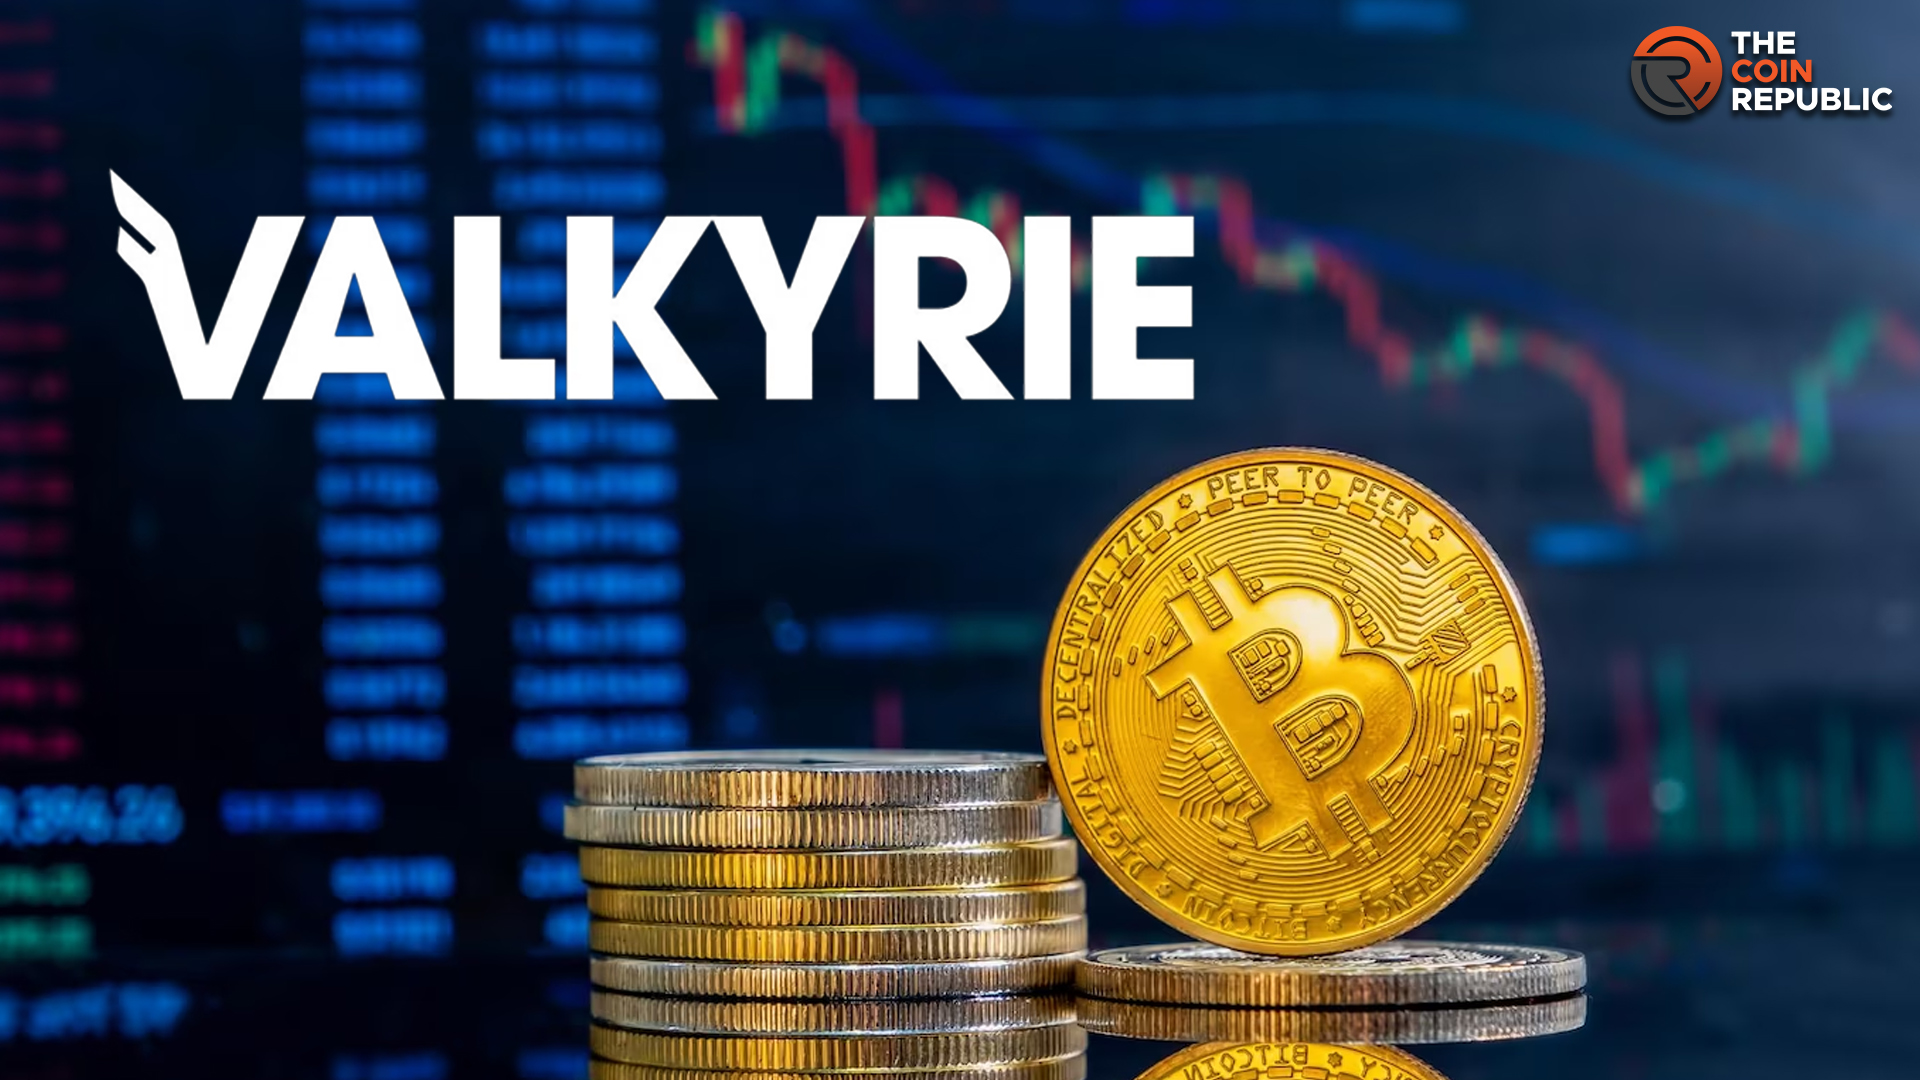 Valkyrie Funds Updated The Date for its Bitcoin ETF Filing